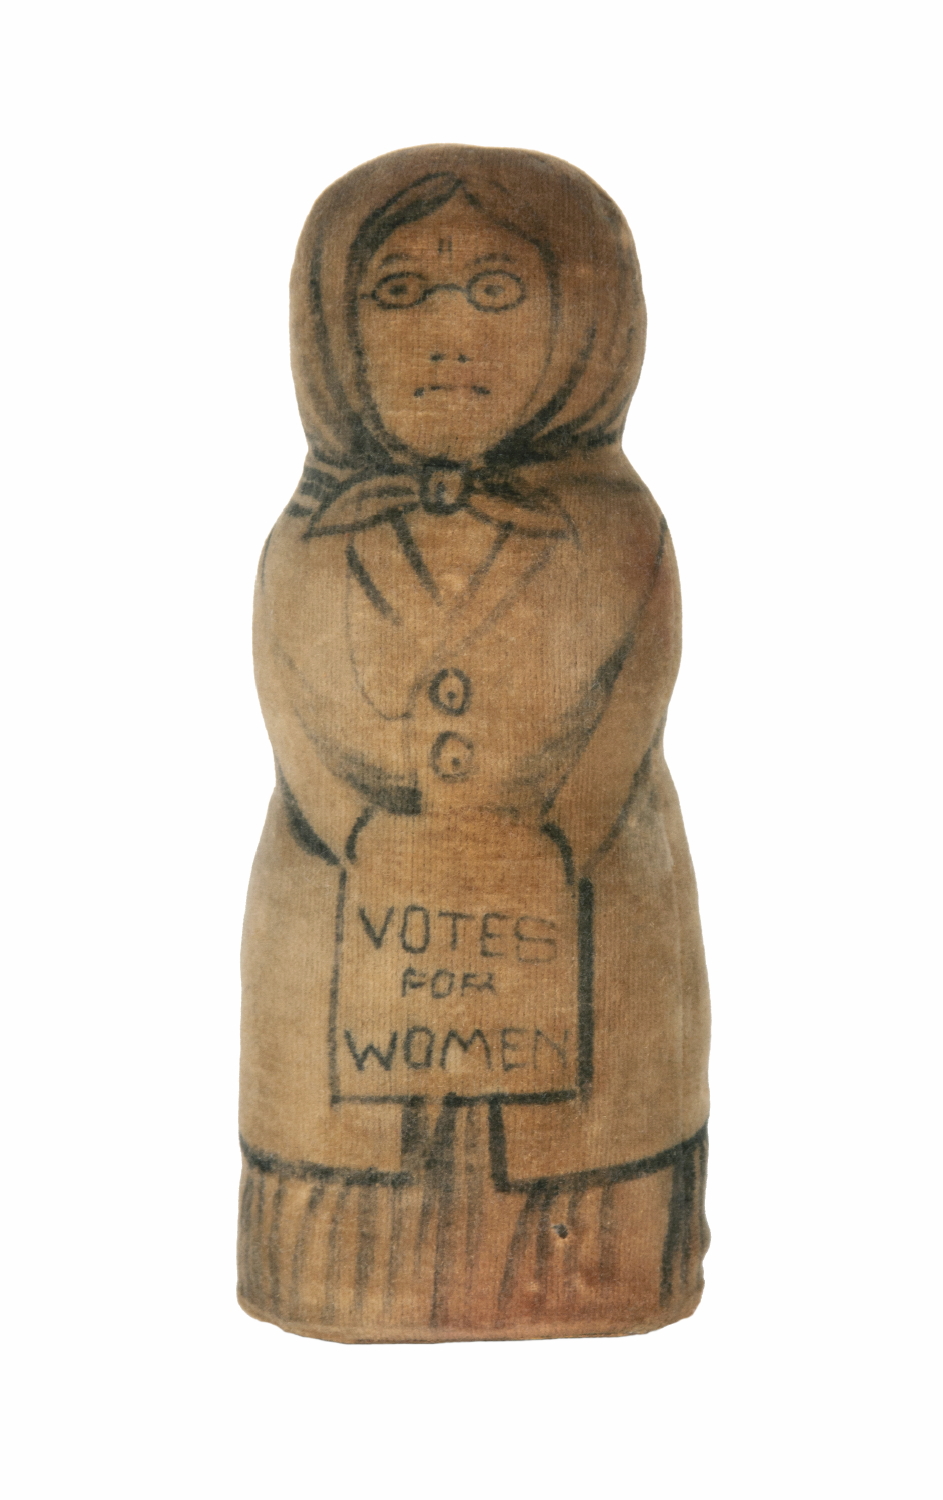 ANTI-WOMEN’S SUFFRAGE PIN CUSHION, MADE OF VELVETEEN AND HAND-PAINTED, ENGLISH, CIRCA 1880-1910, EXCEPTIONALLY RARE